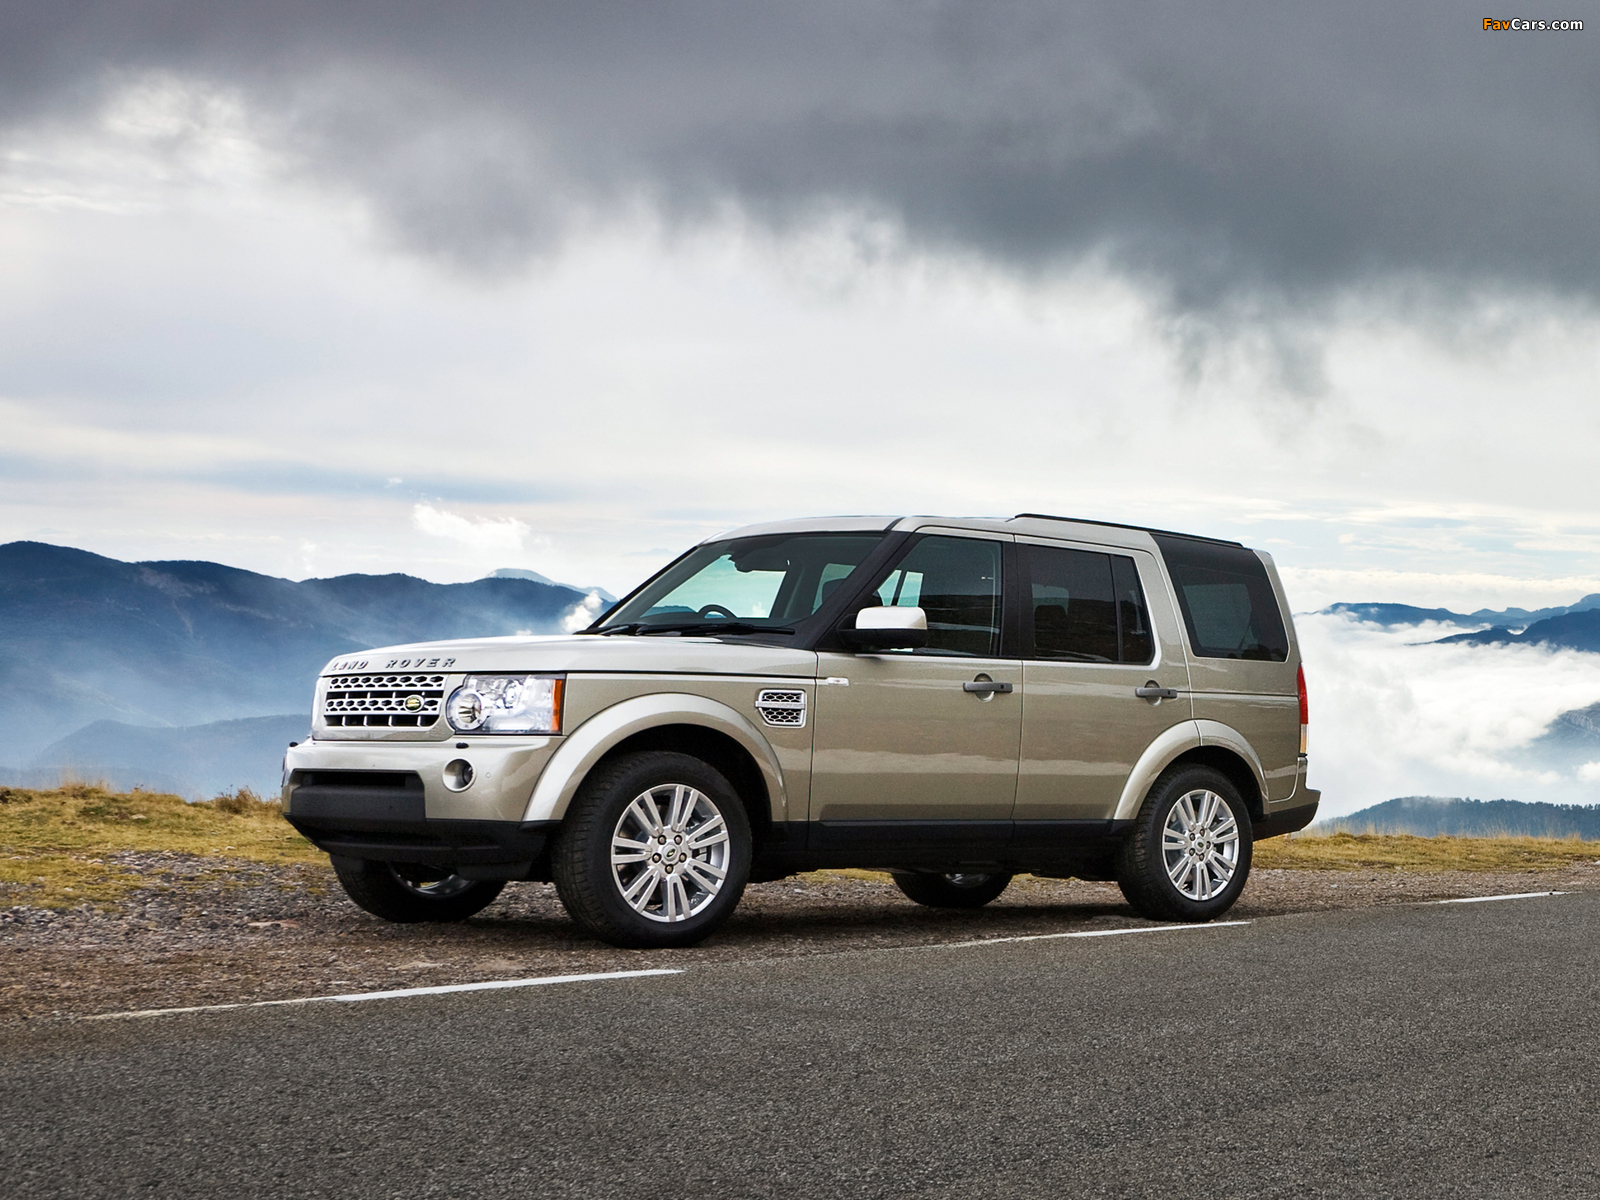 Land Rover Discovery 4 3.0 TDV6 UK-spec 2009 wallpapers (1600 x 1200)